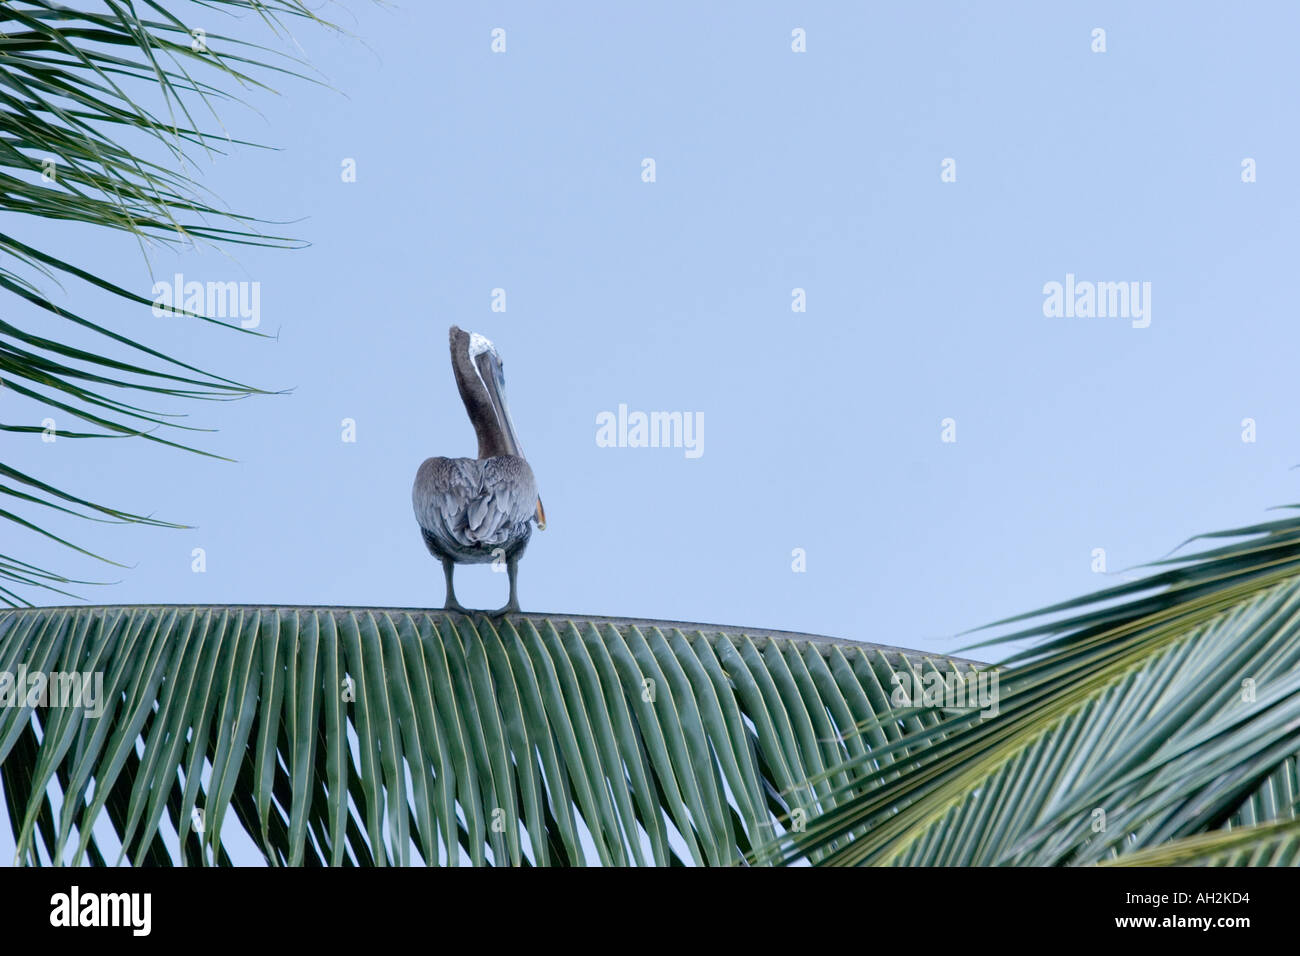 Pelican on a palm tree Stock Photo